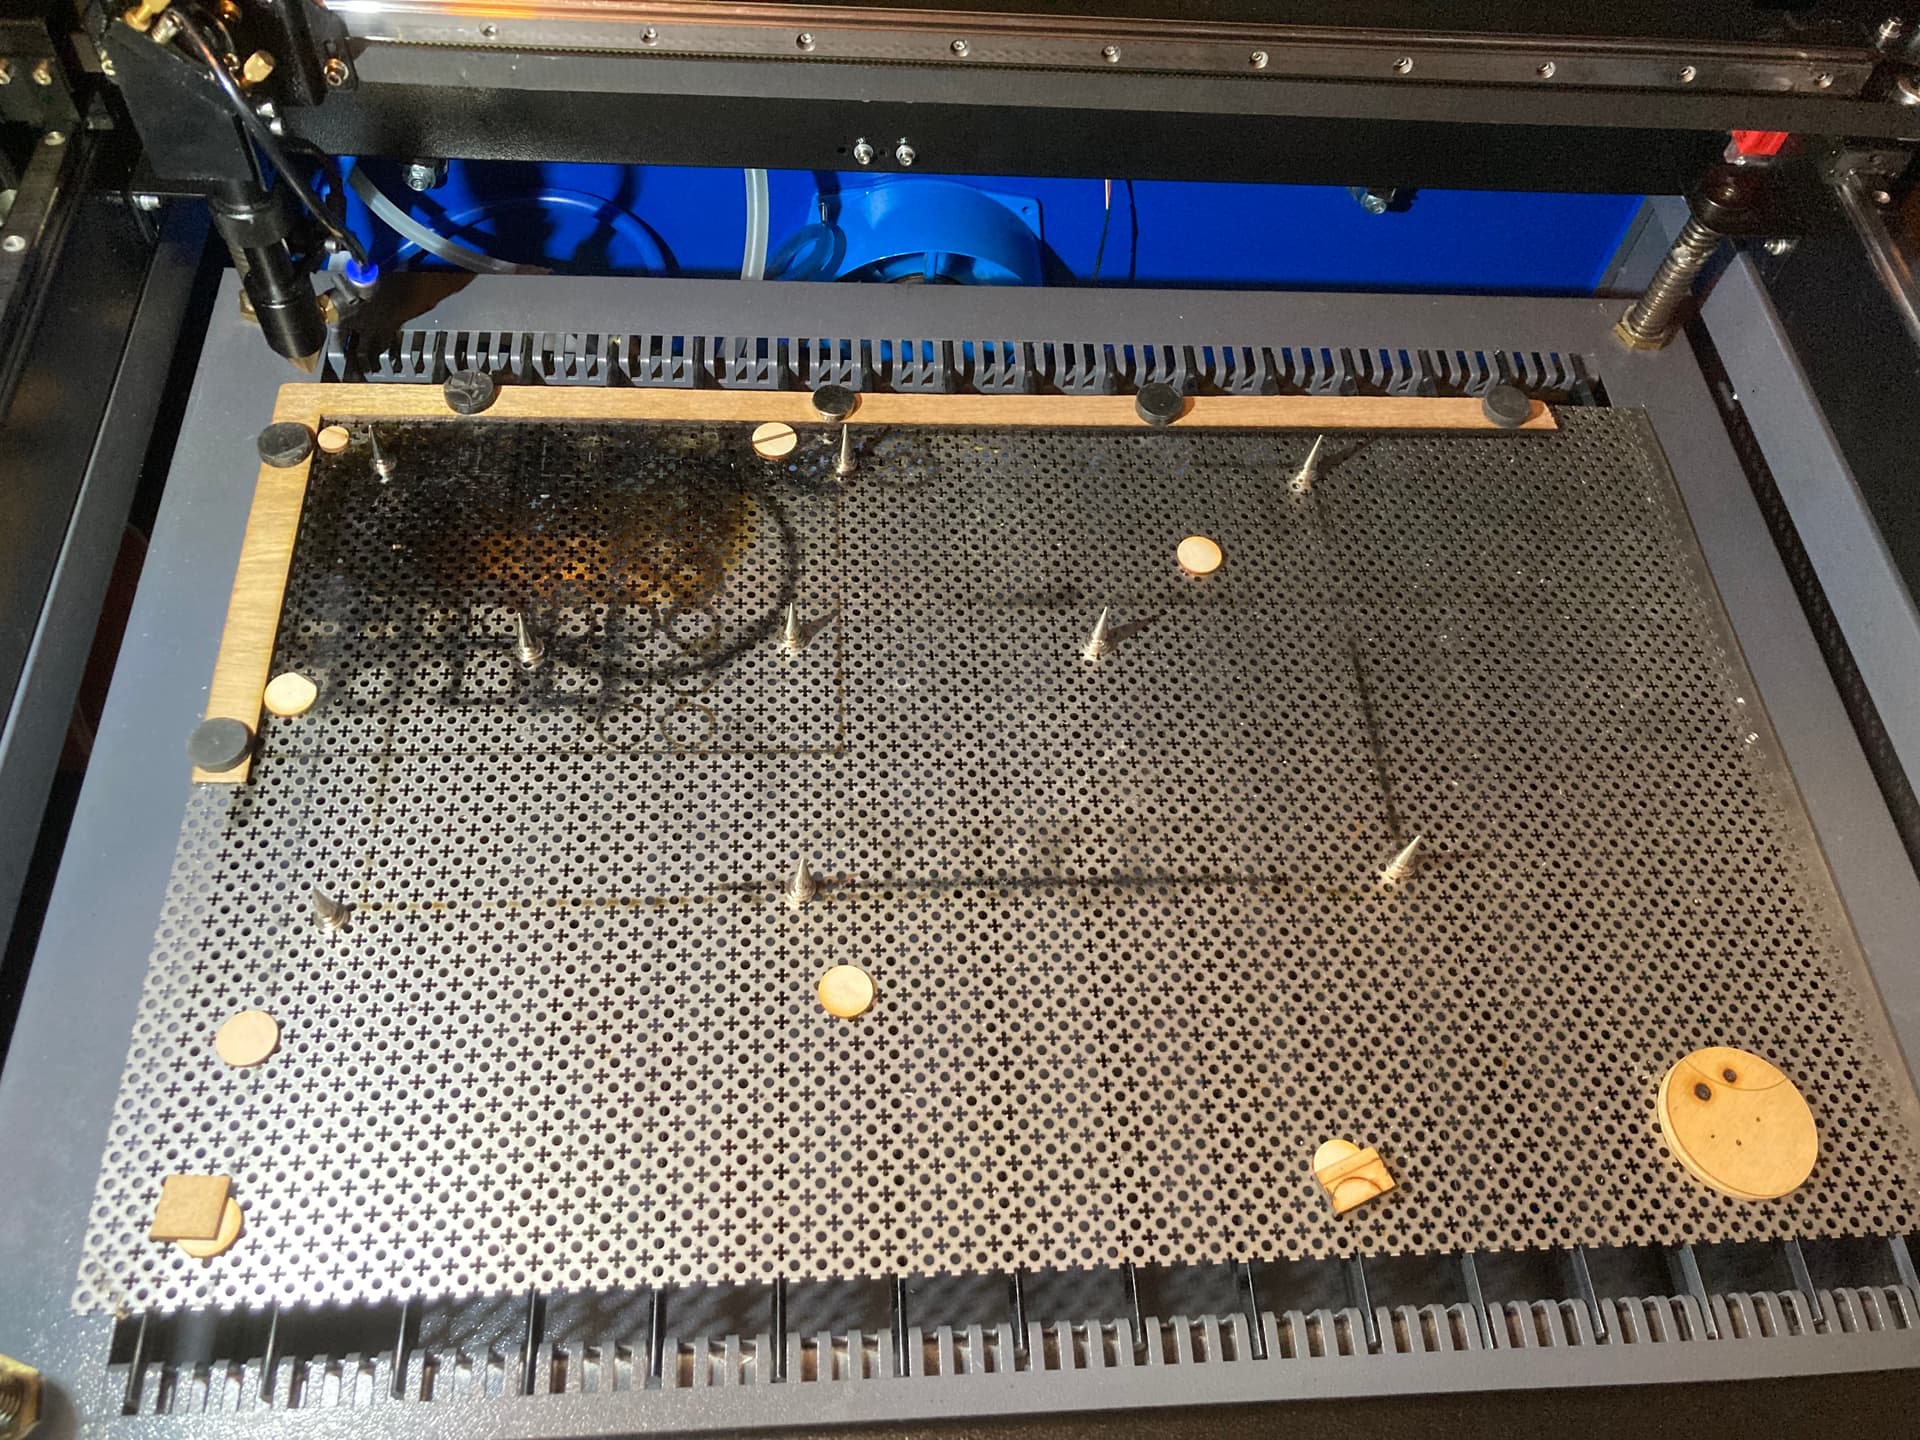 Honeycomb bed for the K40 laser cutter - Way of Wood